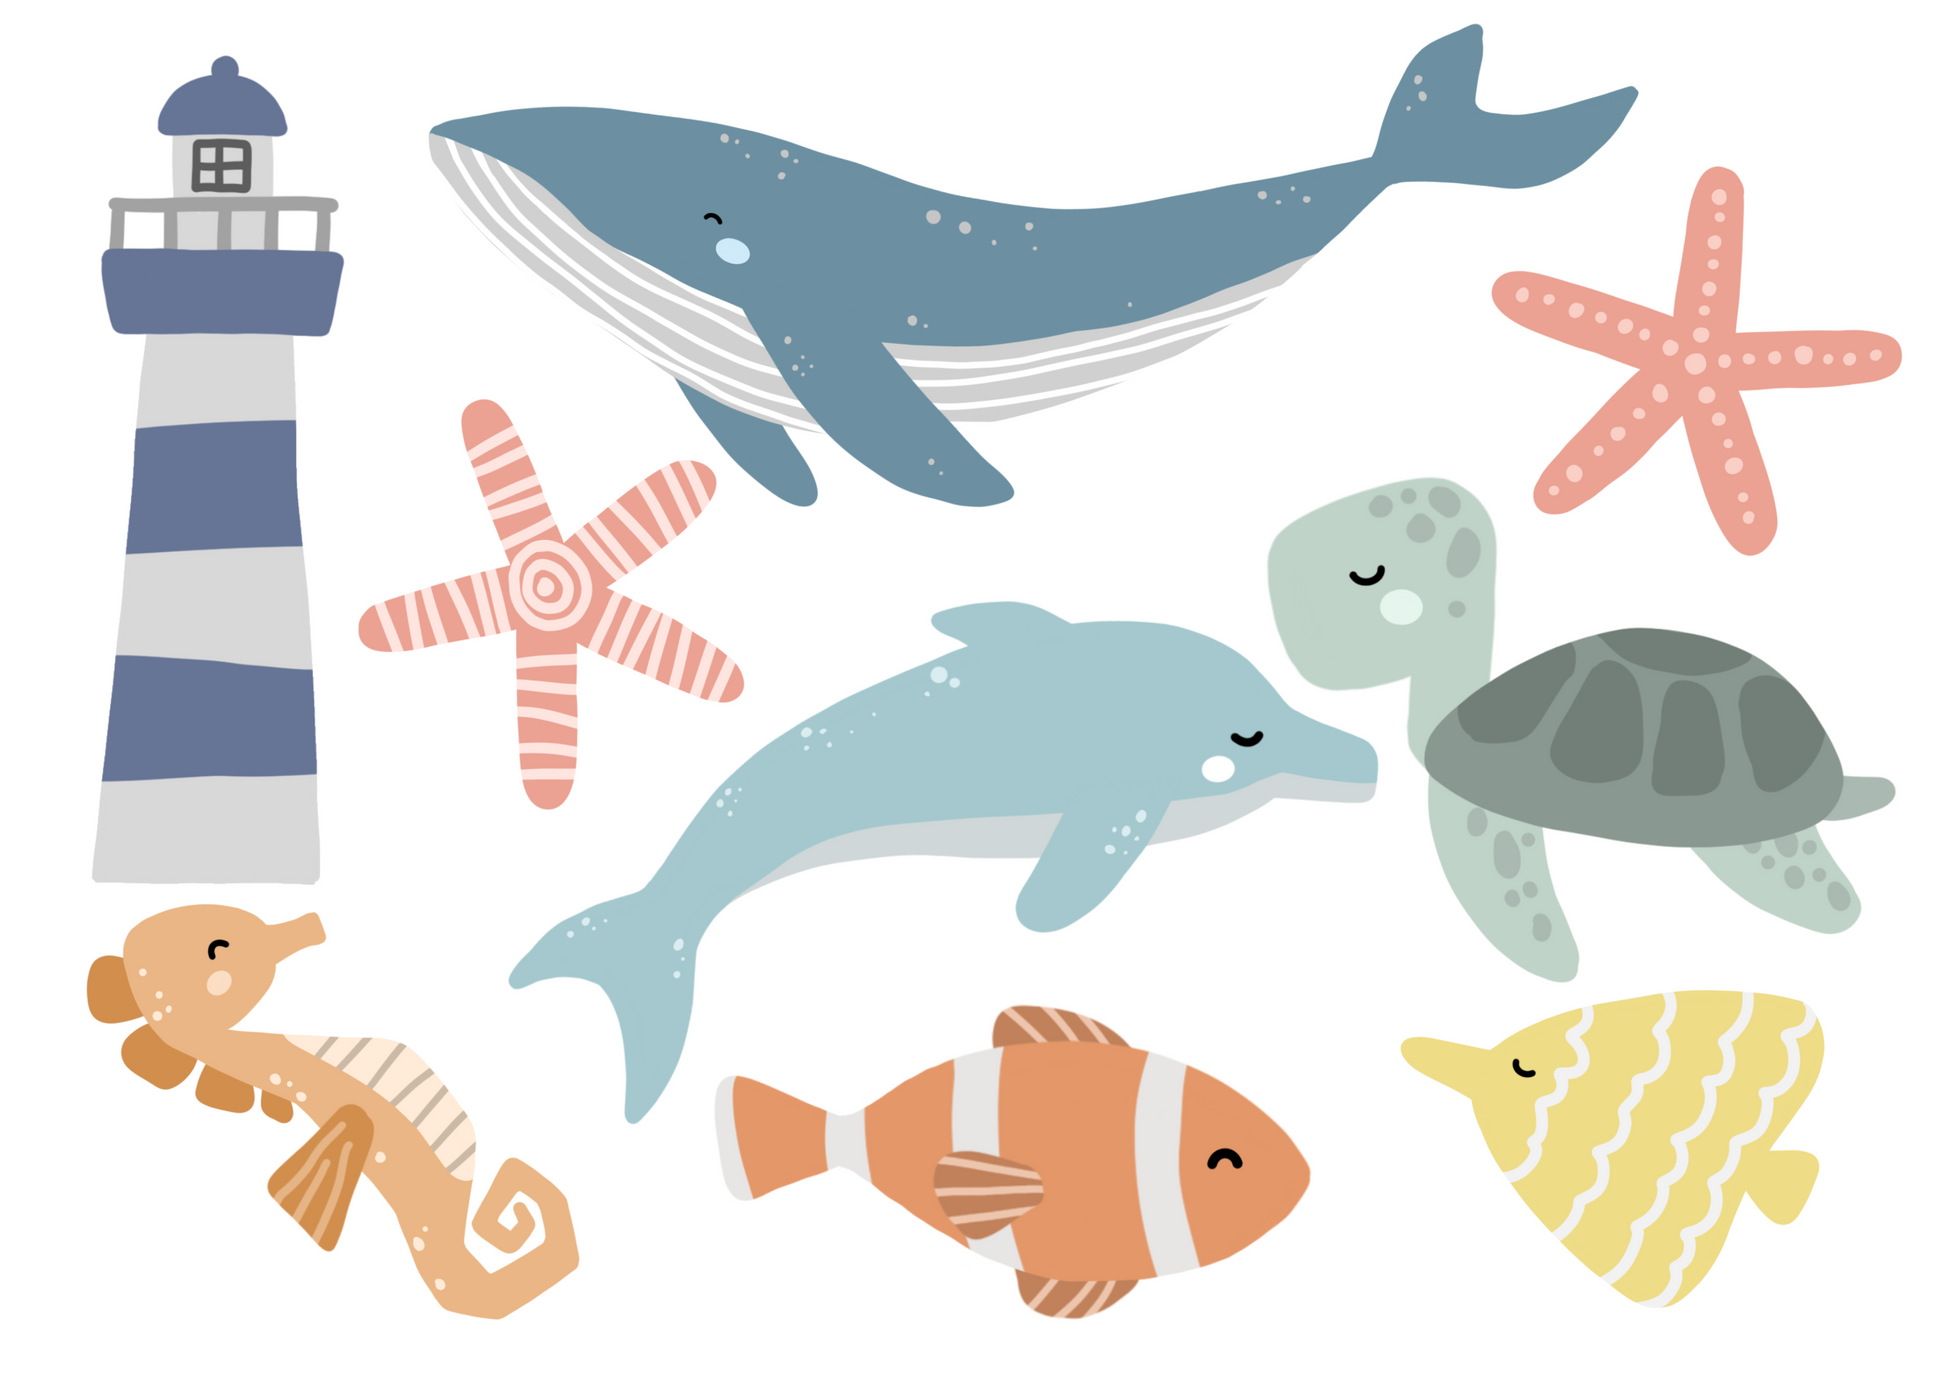 Sea life wall stickers including whale, turtle, fish, sea star and light house